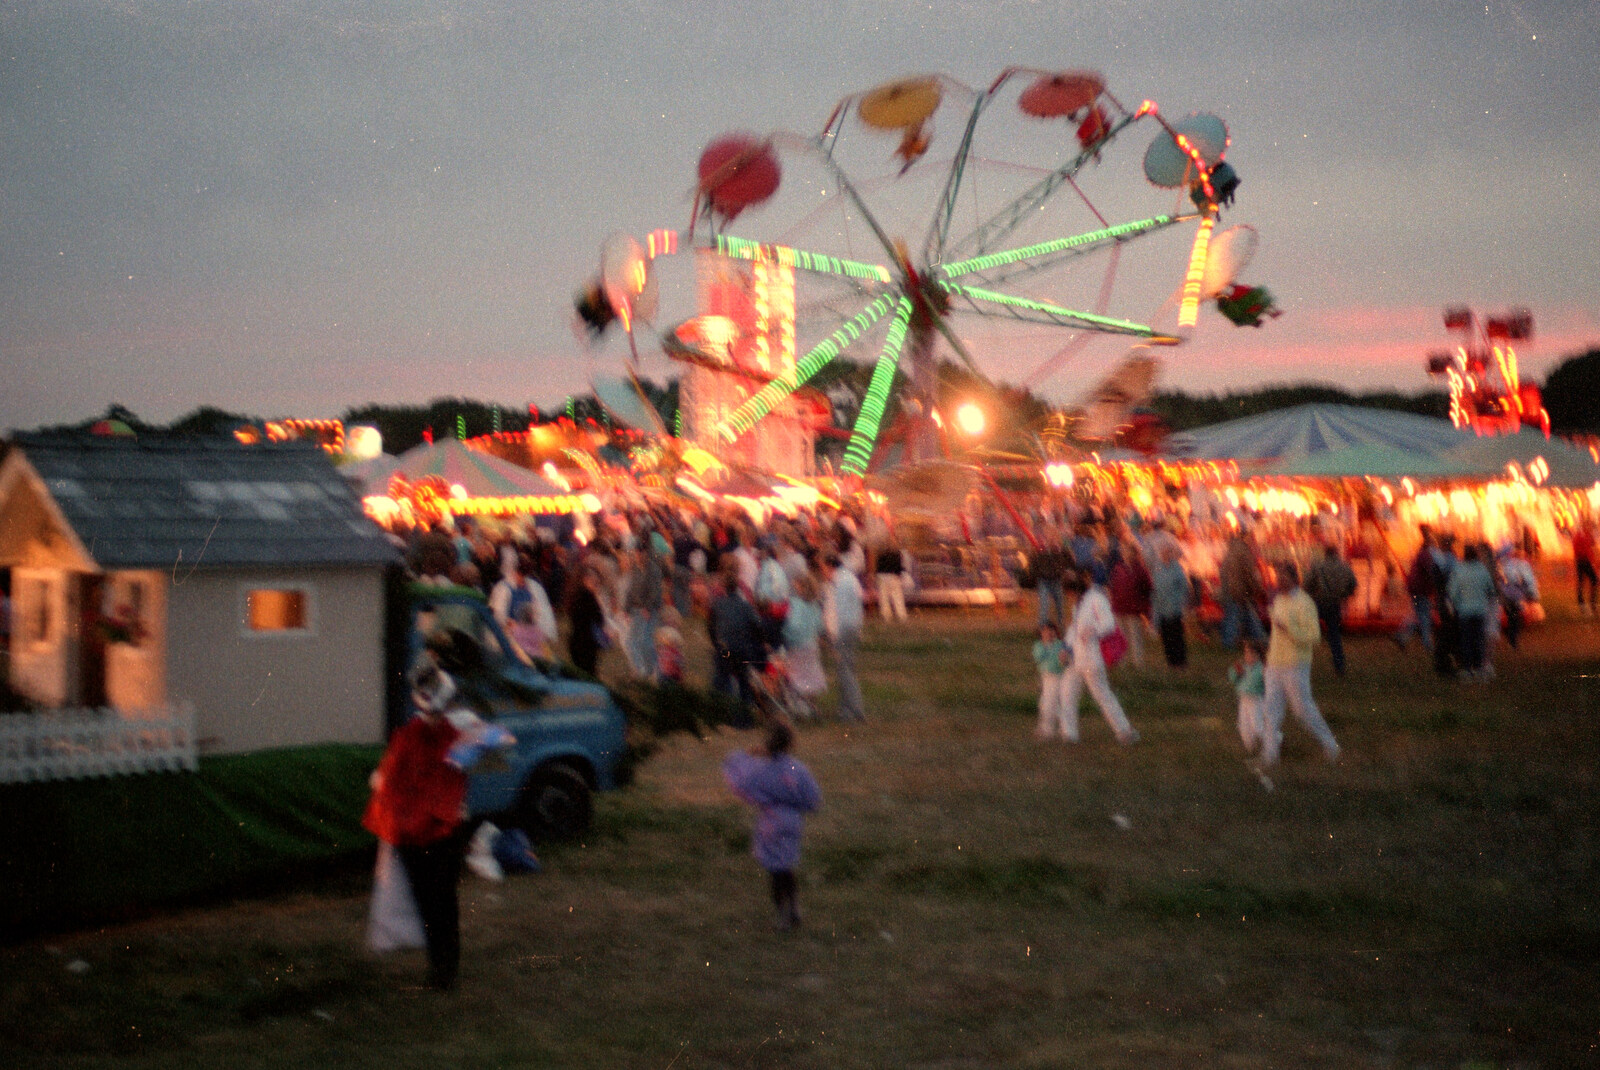 A blurry but colourful fairground from The Lymington Carnival, Hampshire - 17th June 1985